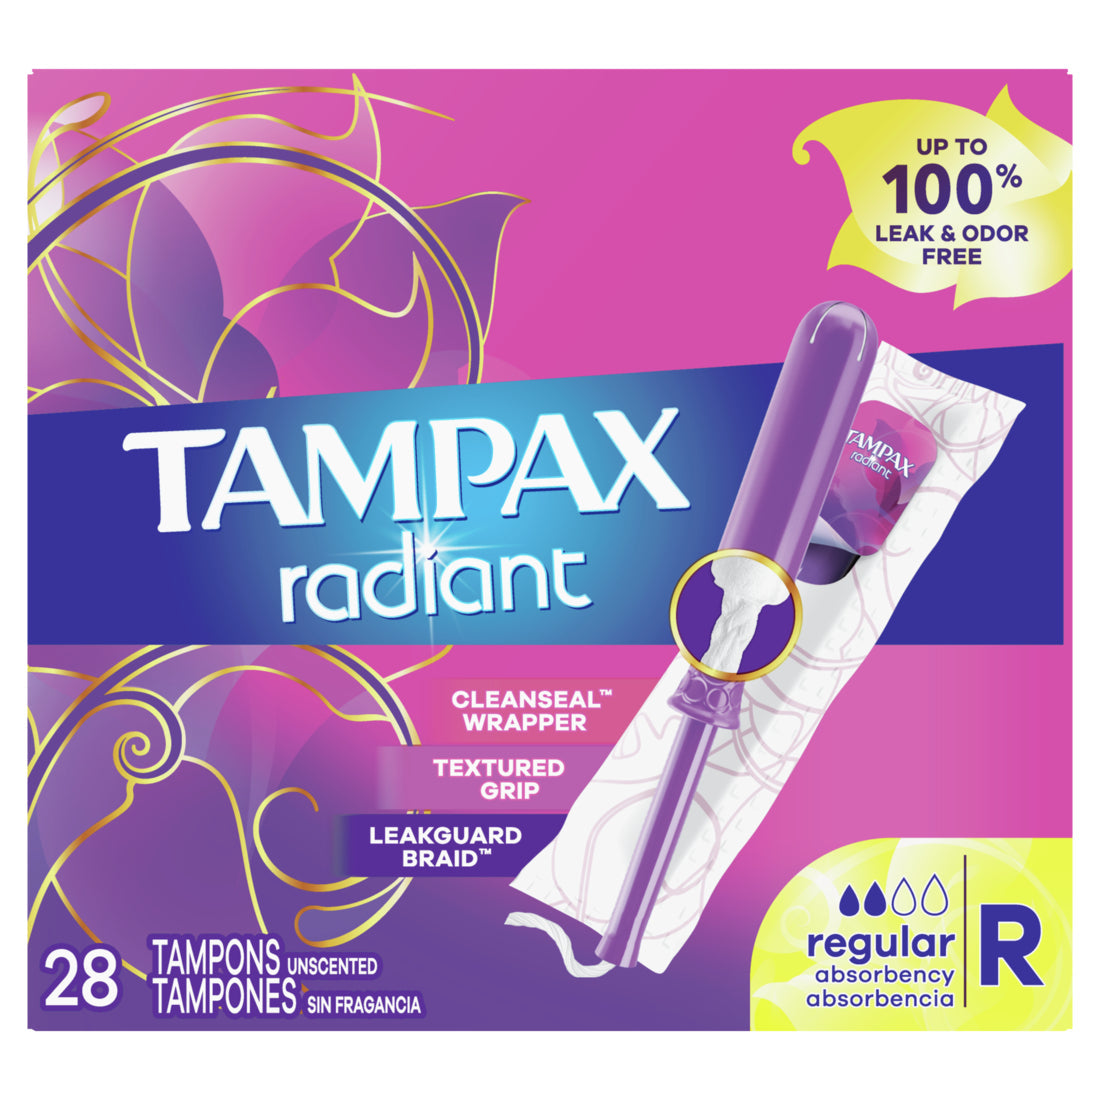 Tampax Radiant Tampons with LeakGuard Braid Regular Absorbency Unscented - 28ct/6pk